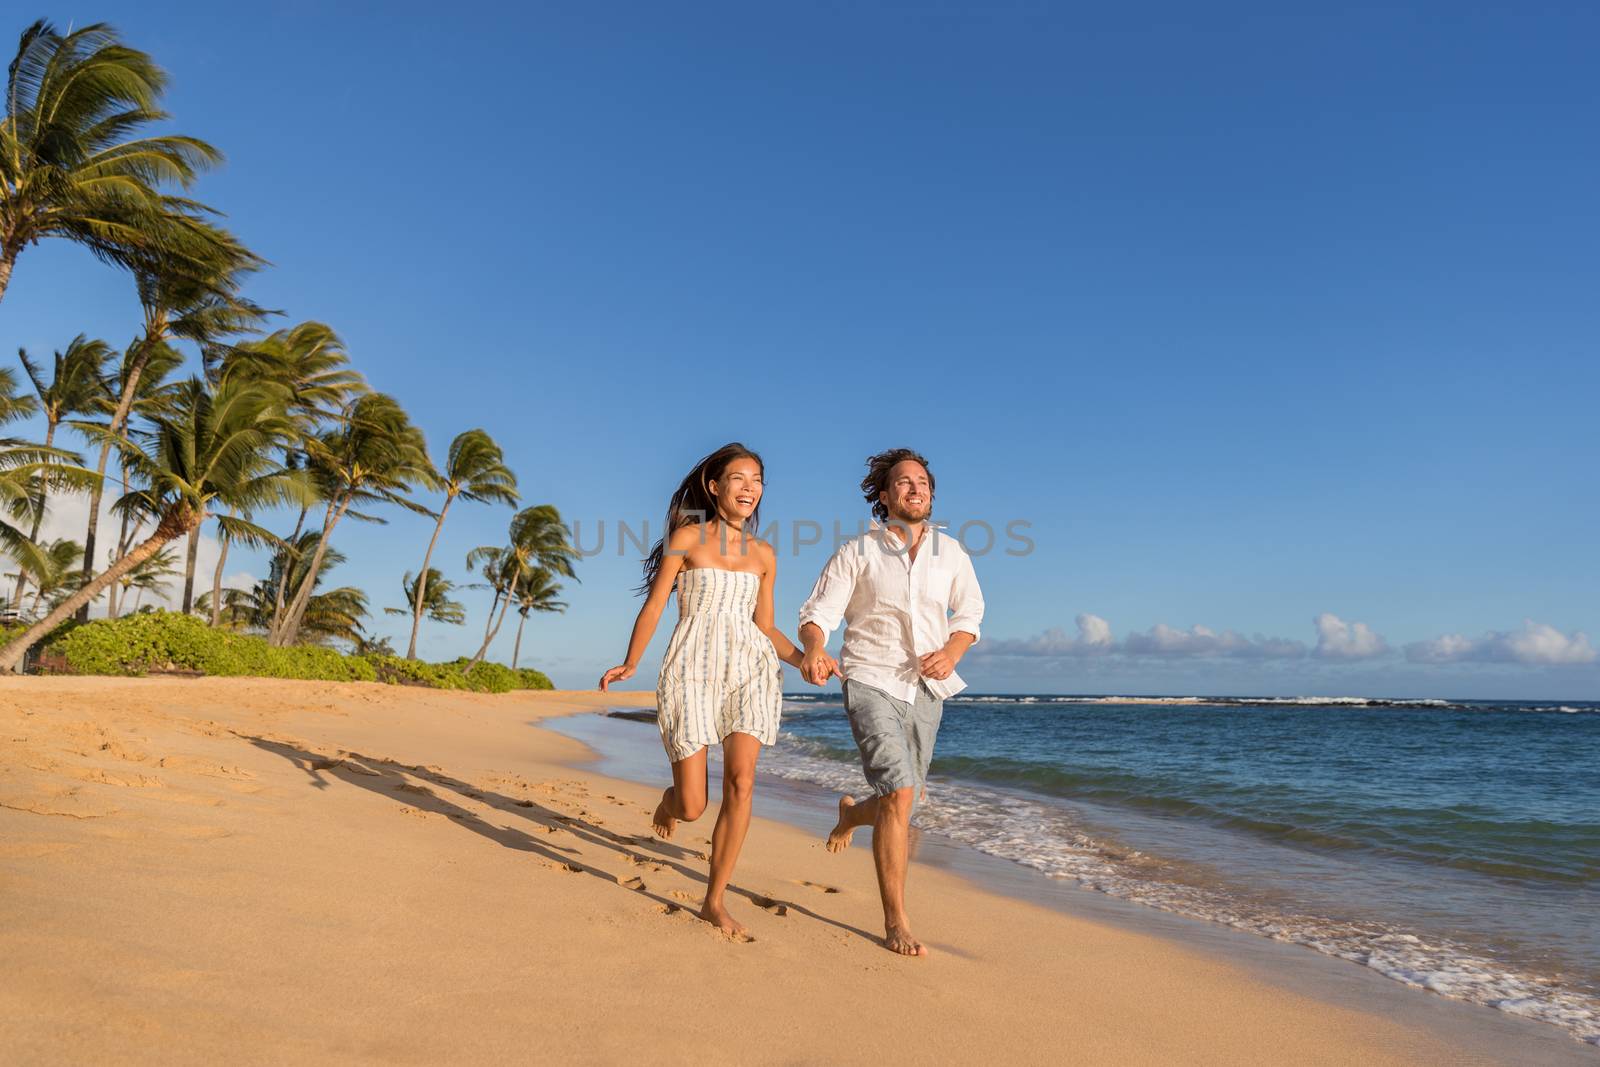 Happy couple relaxing running together on beach. Young multiracial people having fun during sunset on tropical vacation. Summer travel destination.